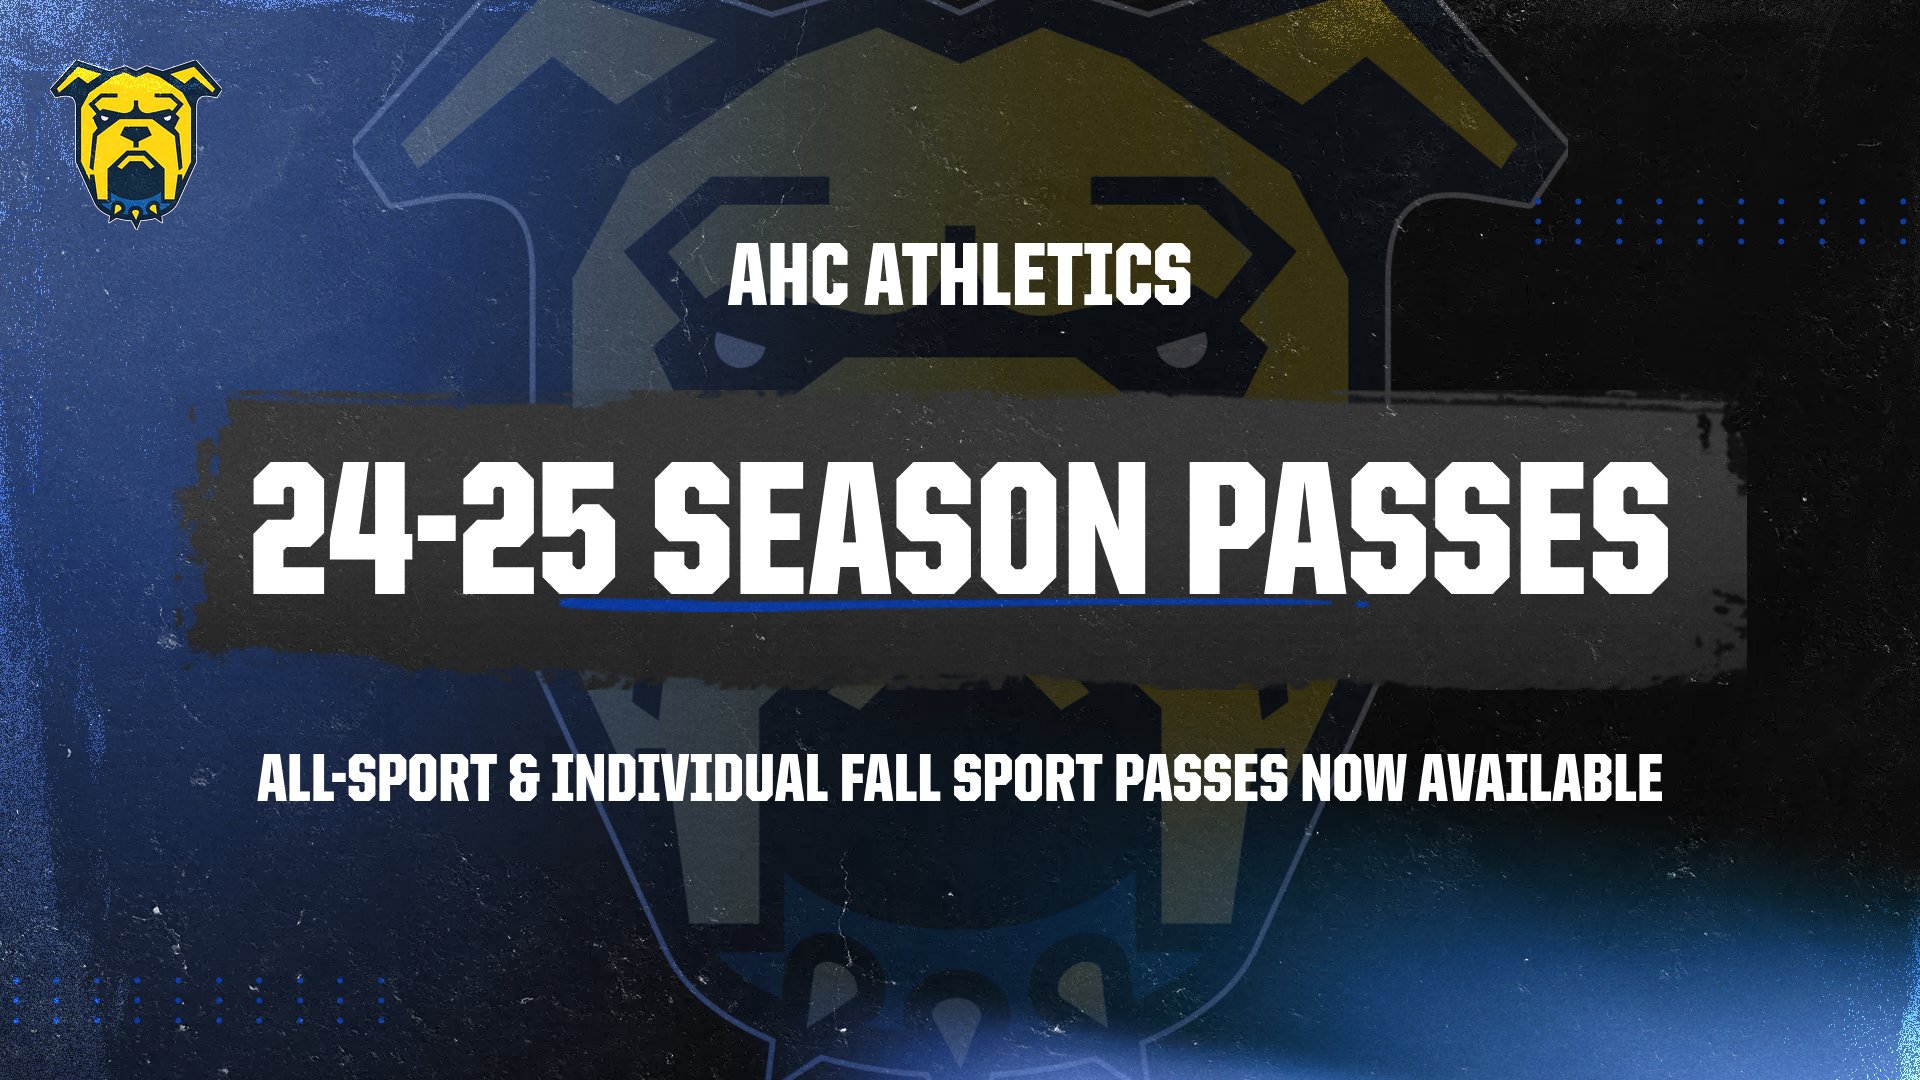 All-Sport & Fall Season Passes Now Available for Purchase